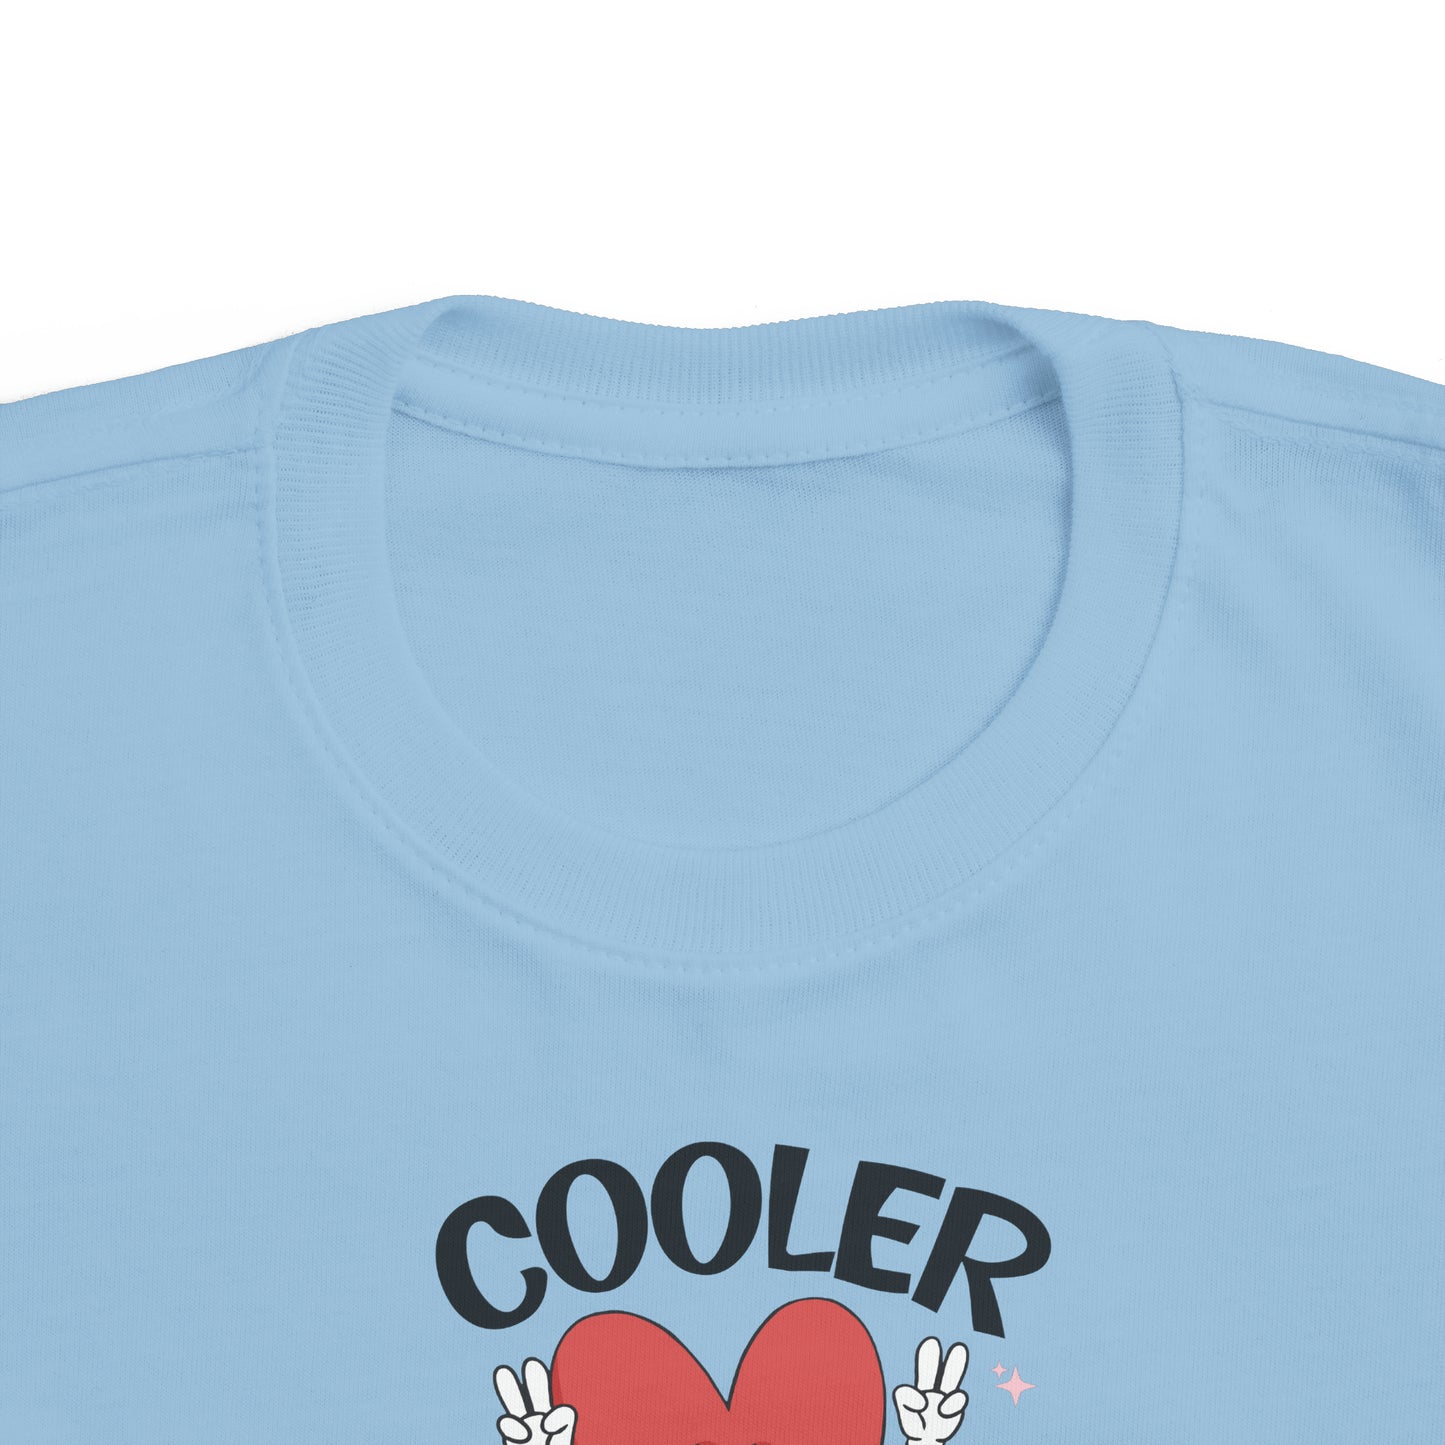 cooler than cupid Toddler's Fine Jersey Tee